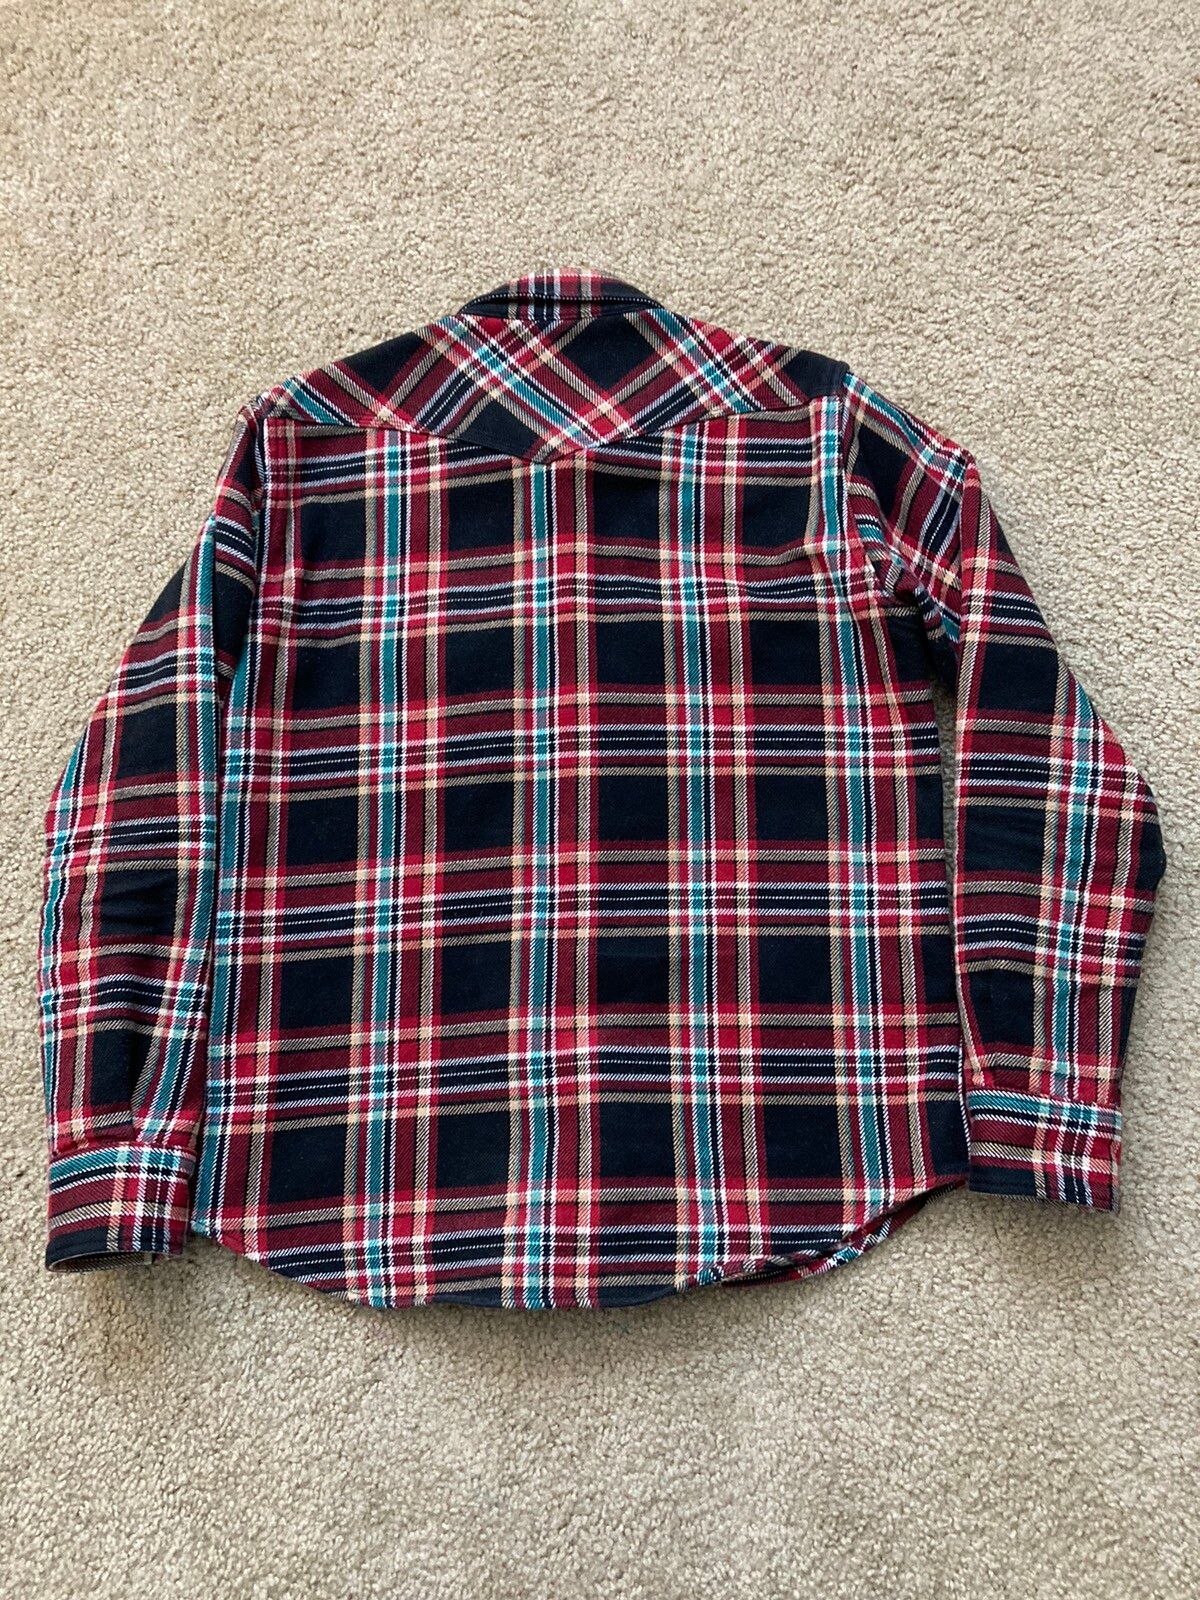 Iron Heart IHSH-237 Flannel Size US L / EU 52-54 / 3 - 5 Preview